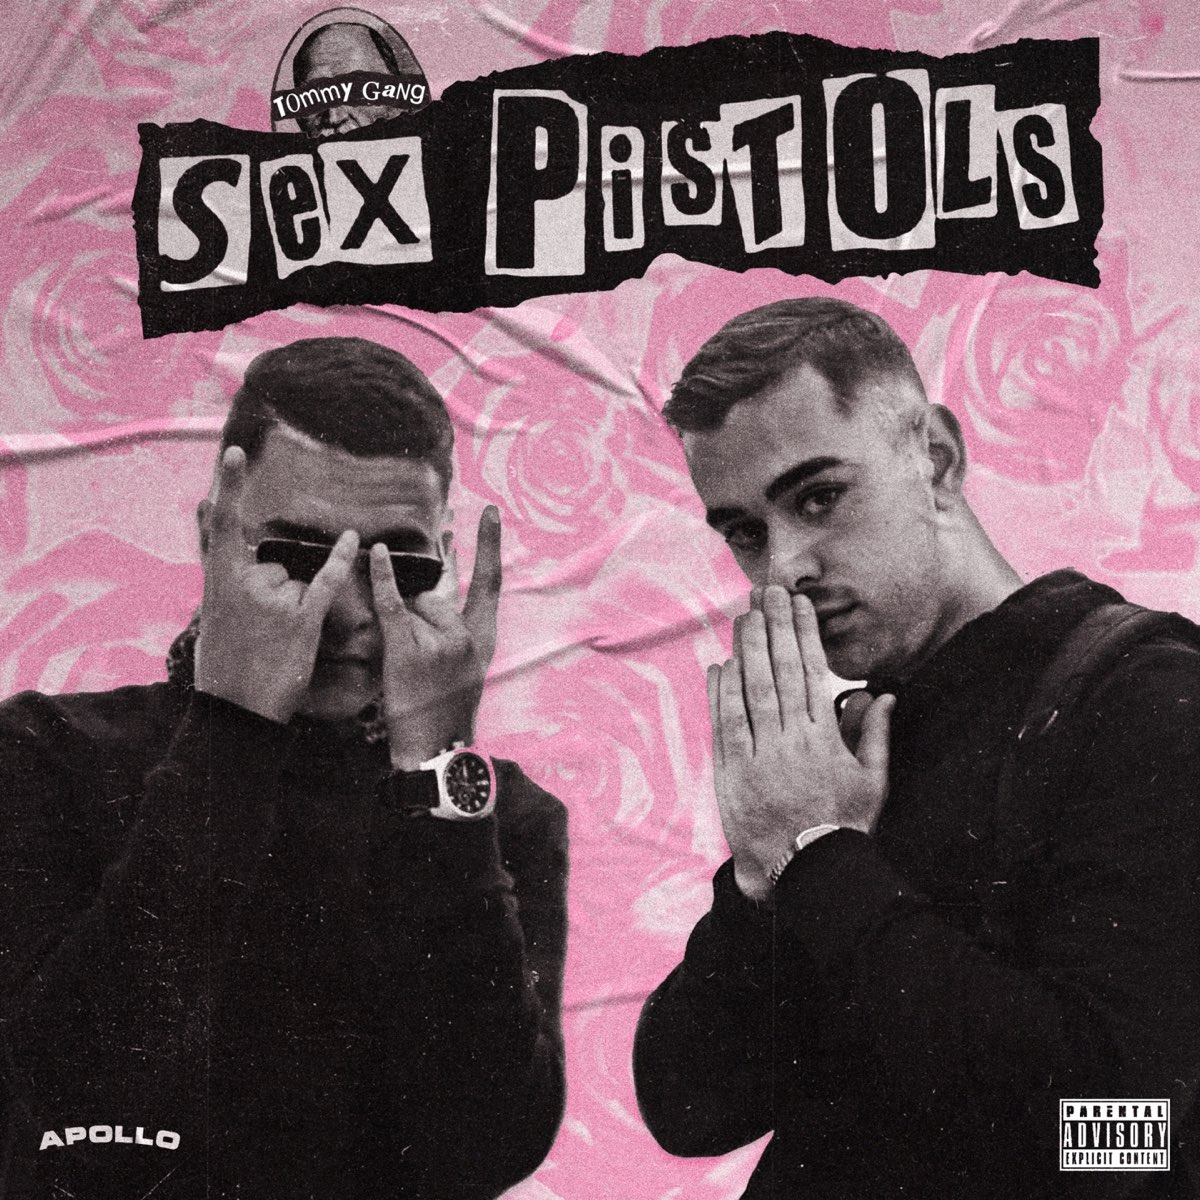 Sex Pistols - EP by Tommy Gang on Apple Music